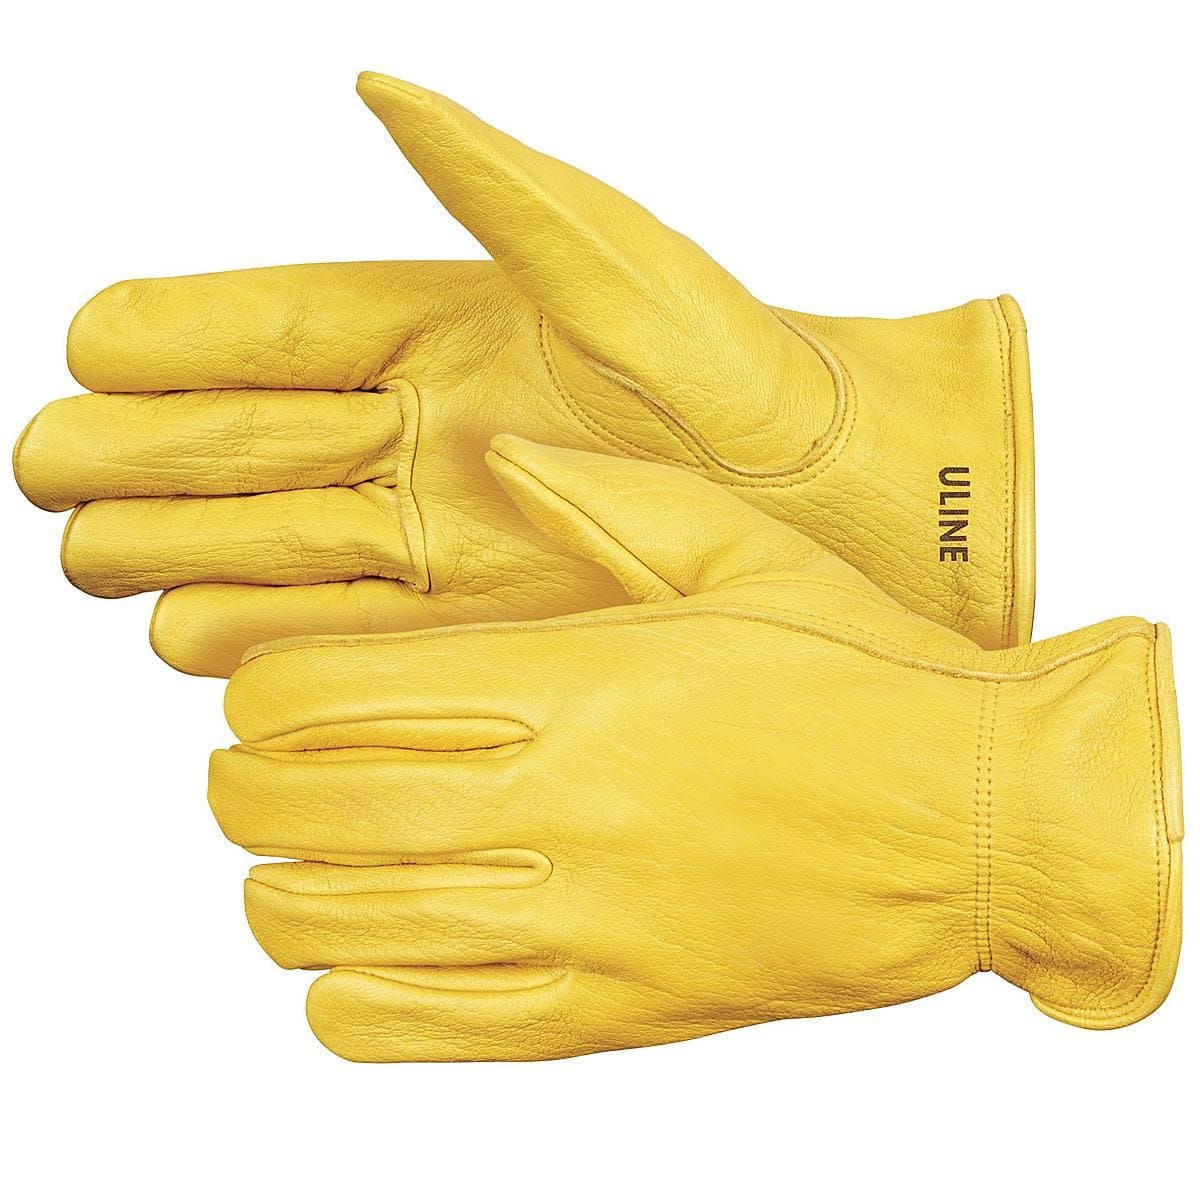 Terra Deerskin Work Gloves | Thinsulate Insulation The Custodian Commercial Sanitation & Industrial Maintenance Products